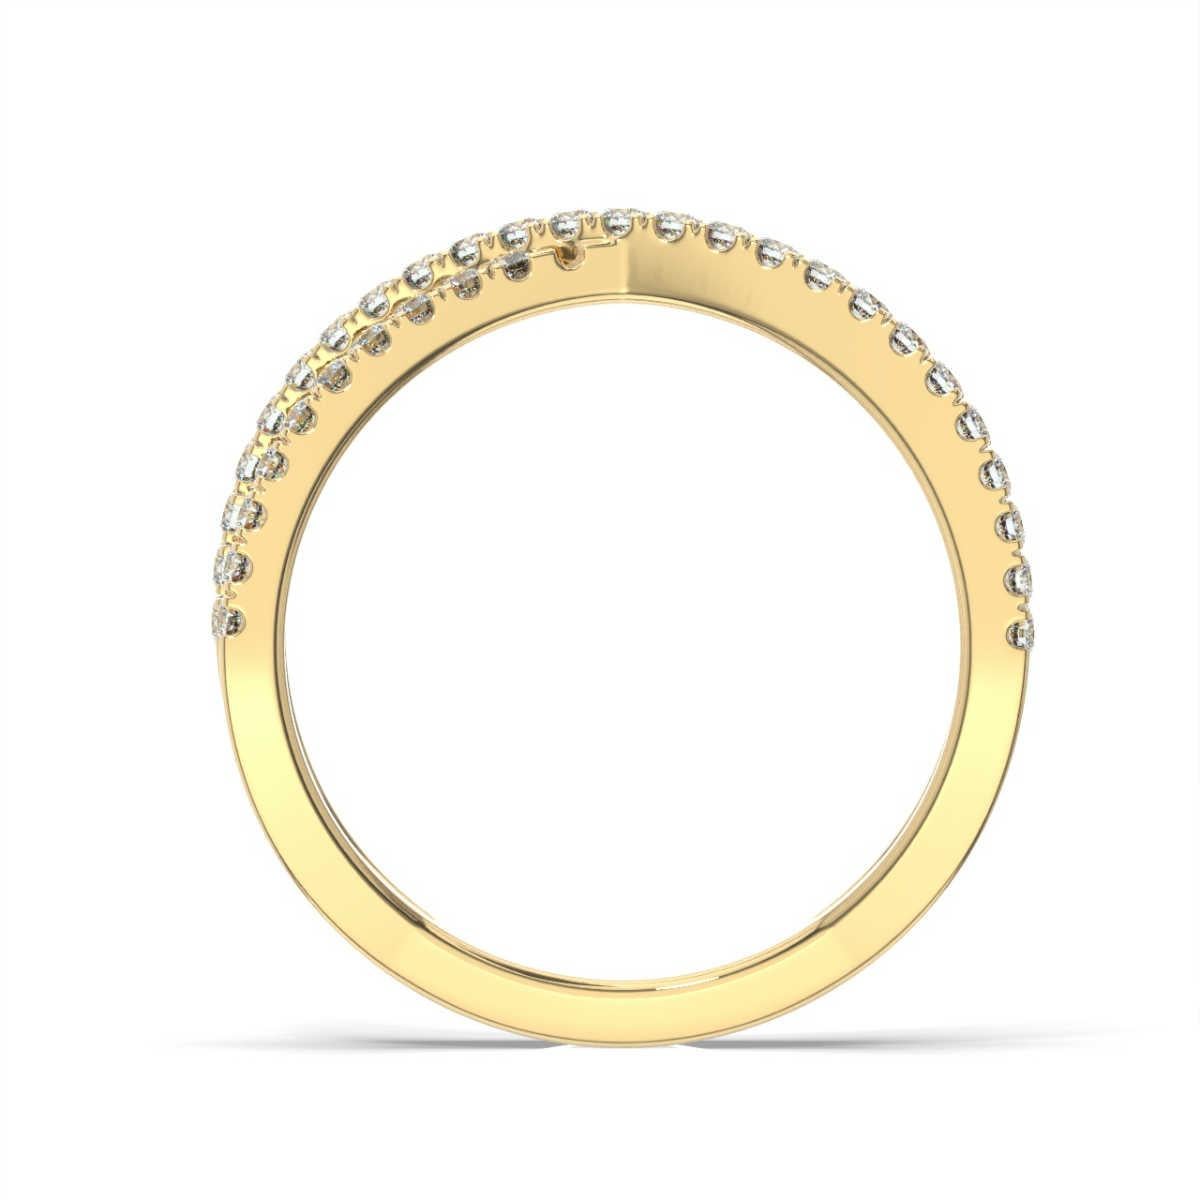 Two petite bands of micro prong set diamonds to wrap interweave each other in this contemporary ring.

Product details: 

Center Gemstone Color: WHITE
Side Gemstone Type: NATURAL DIAMOND
Side Gemstone Shape: ROUND
Metal: 18K Yellow Gold
Metal